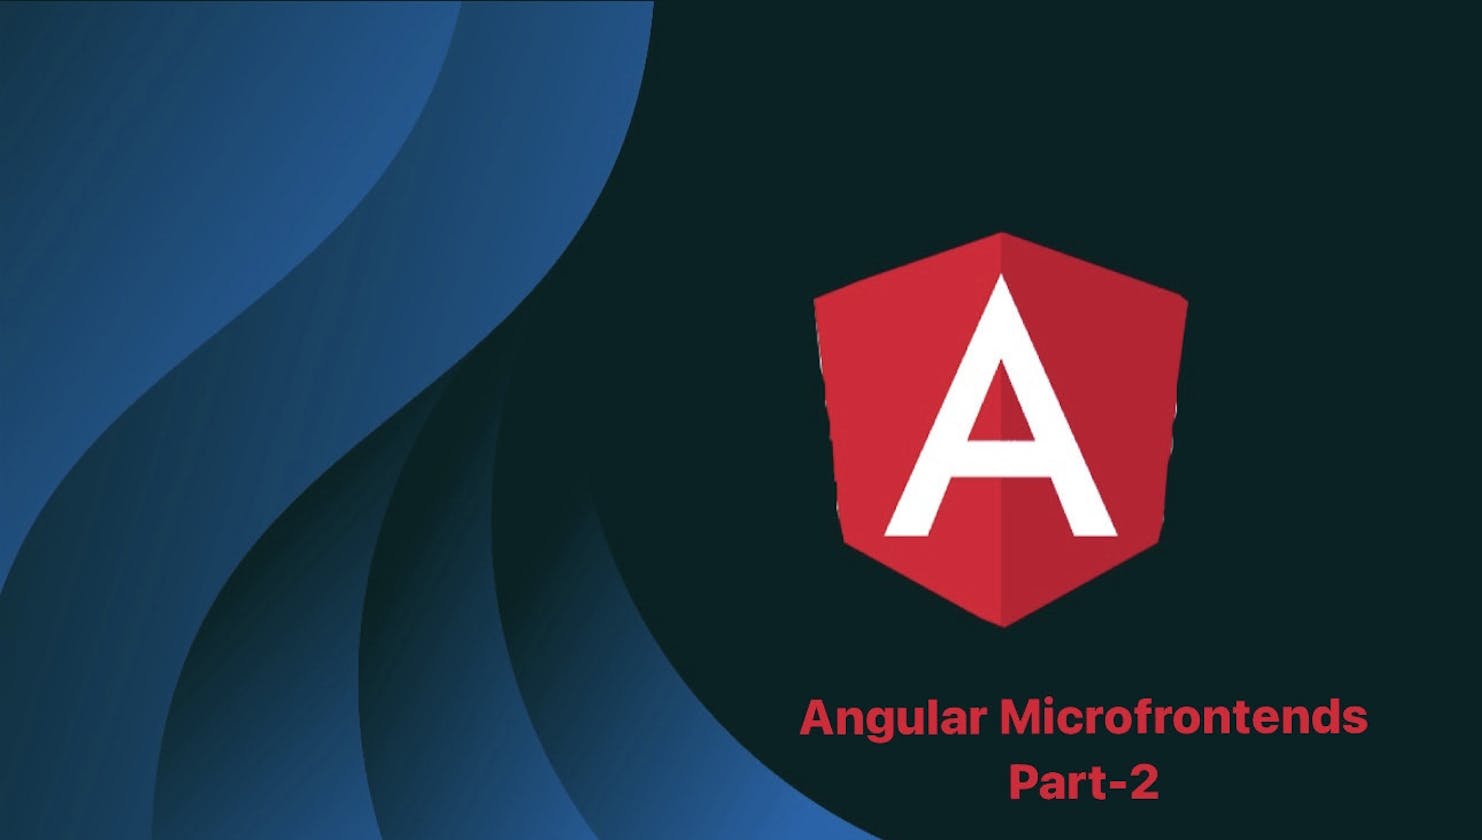 Part 2: Architecting Your Angular Application with Microfrontends